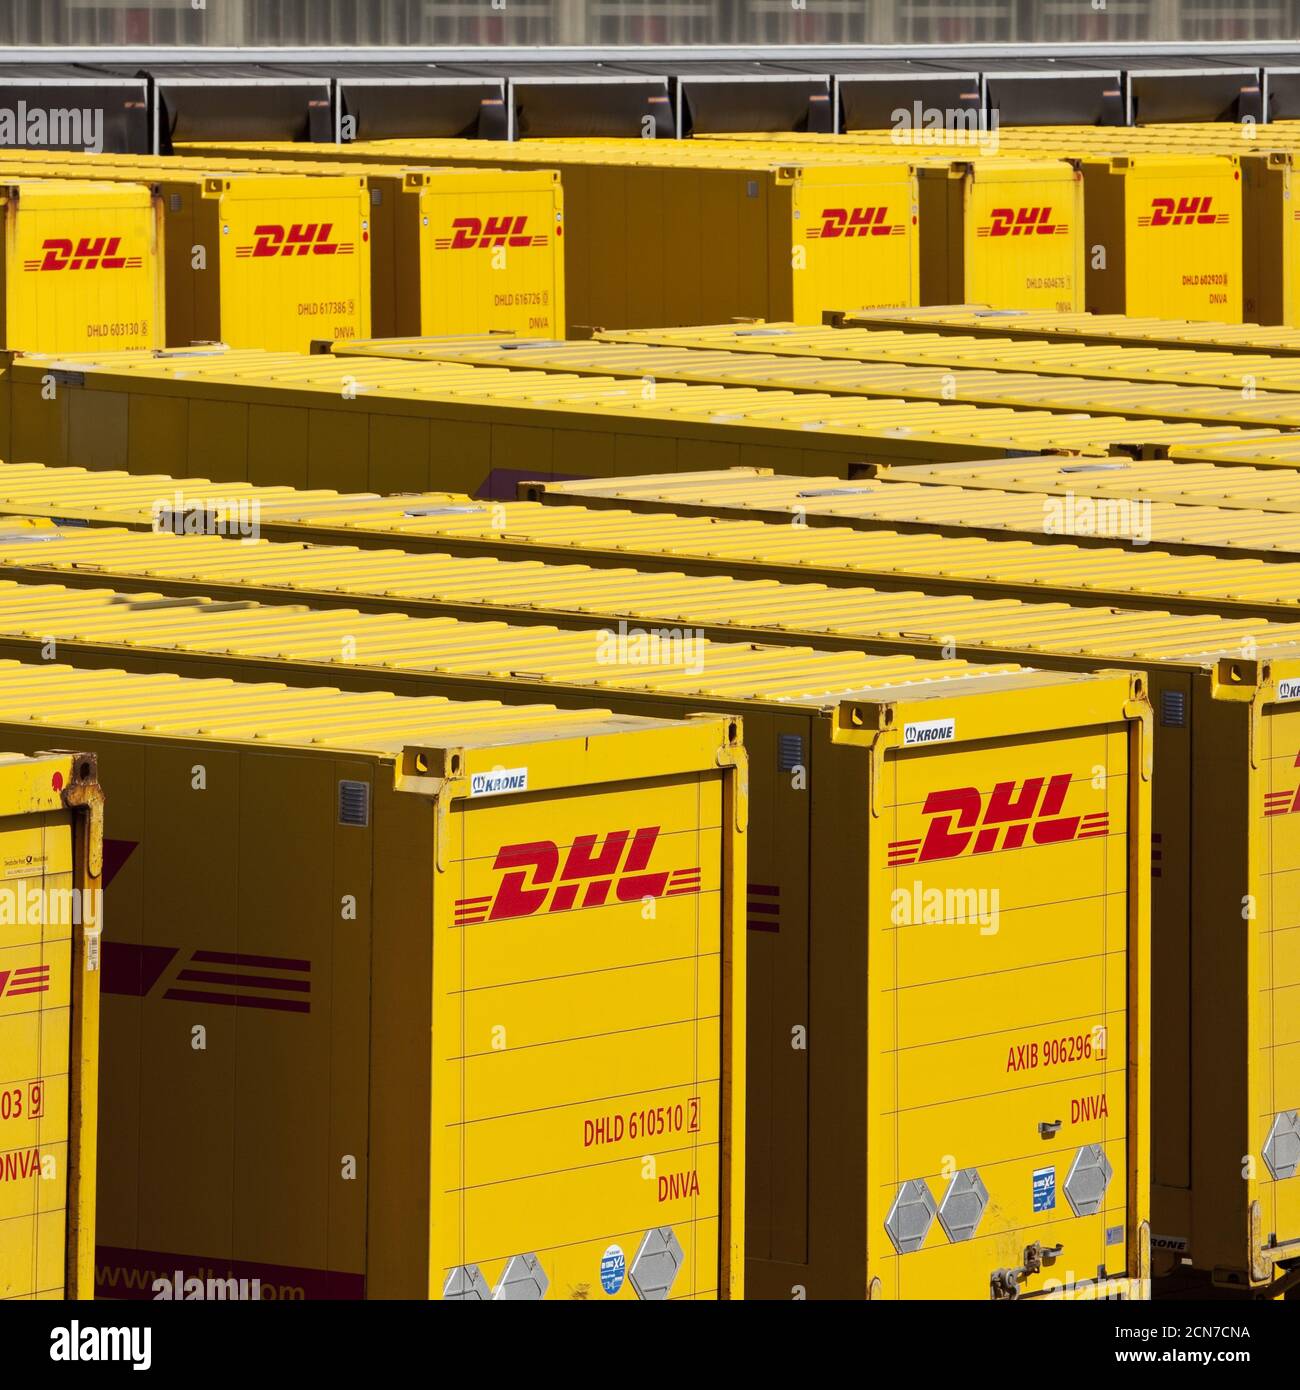 Page 3 Dhl High Resolution Stock Photography And Images Alamy